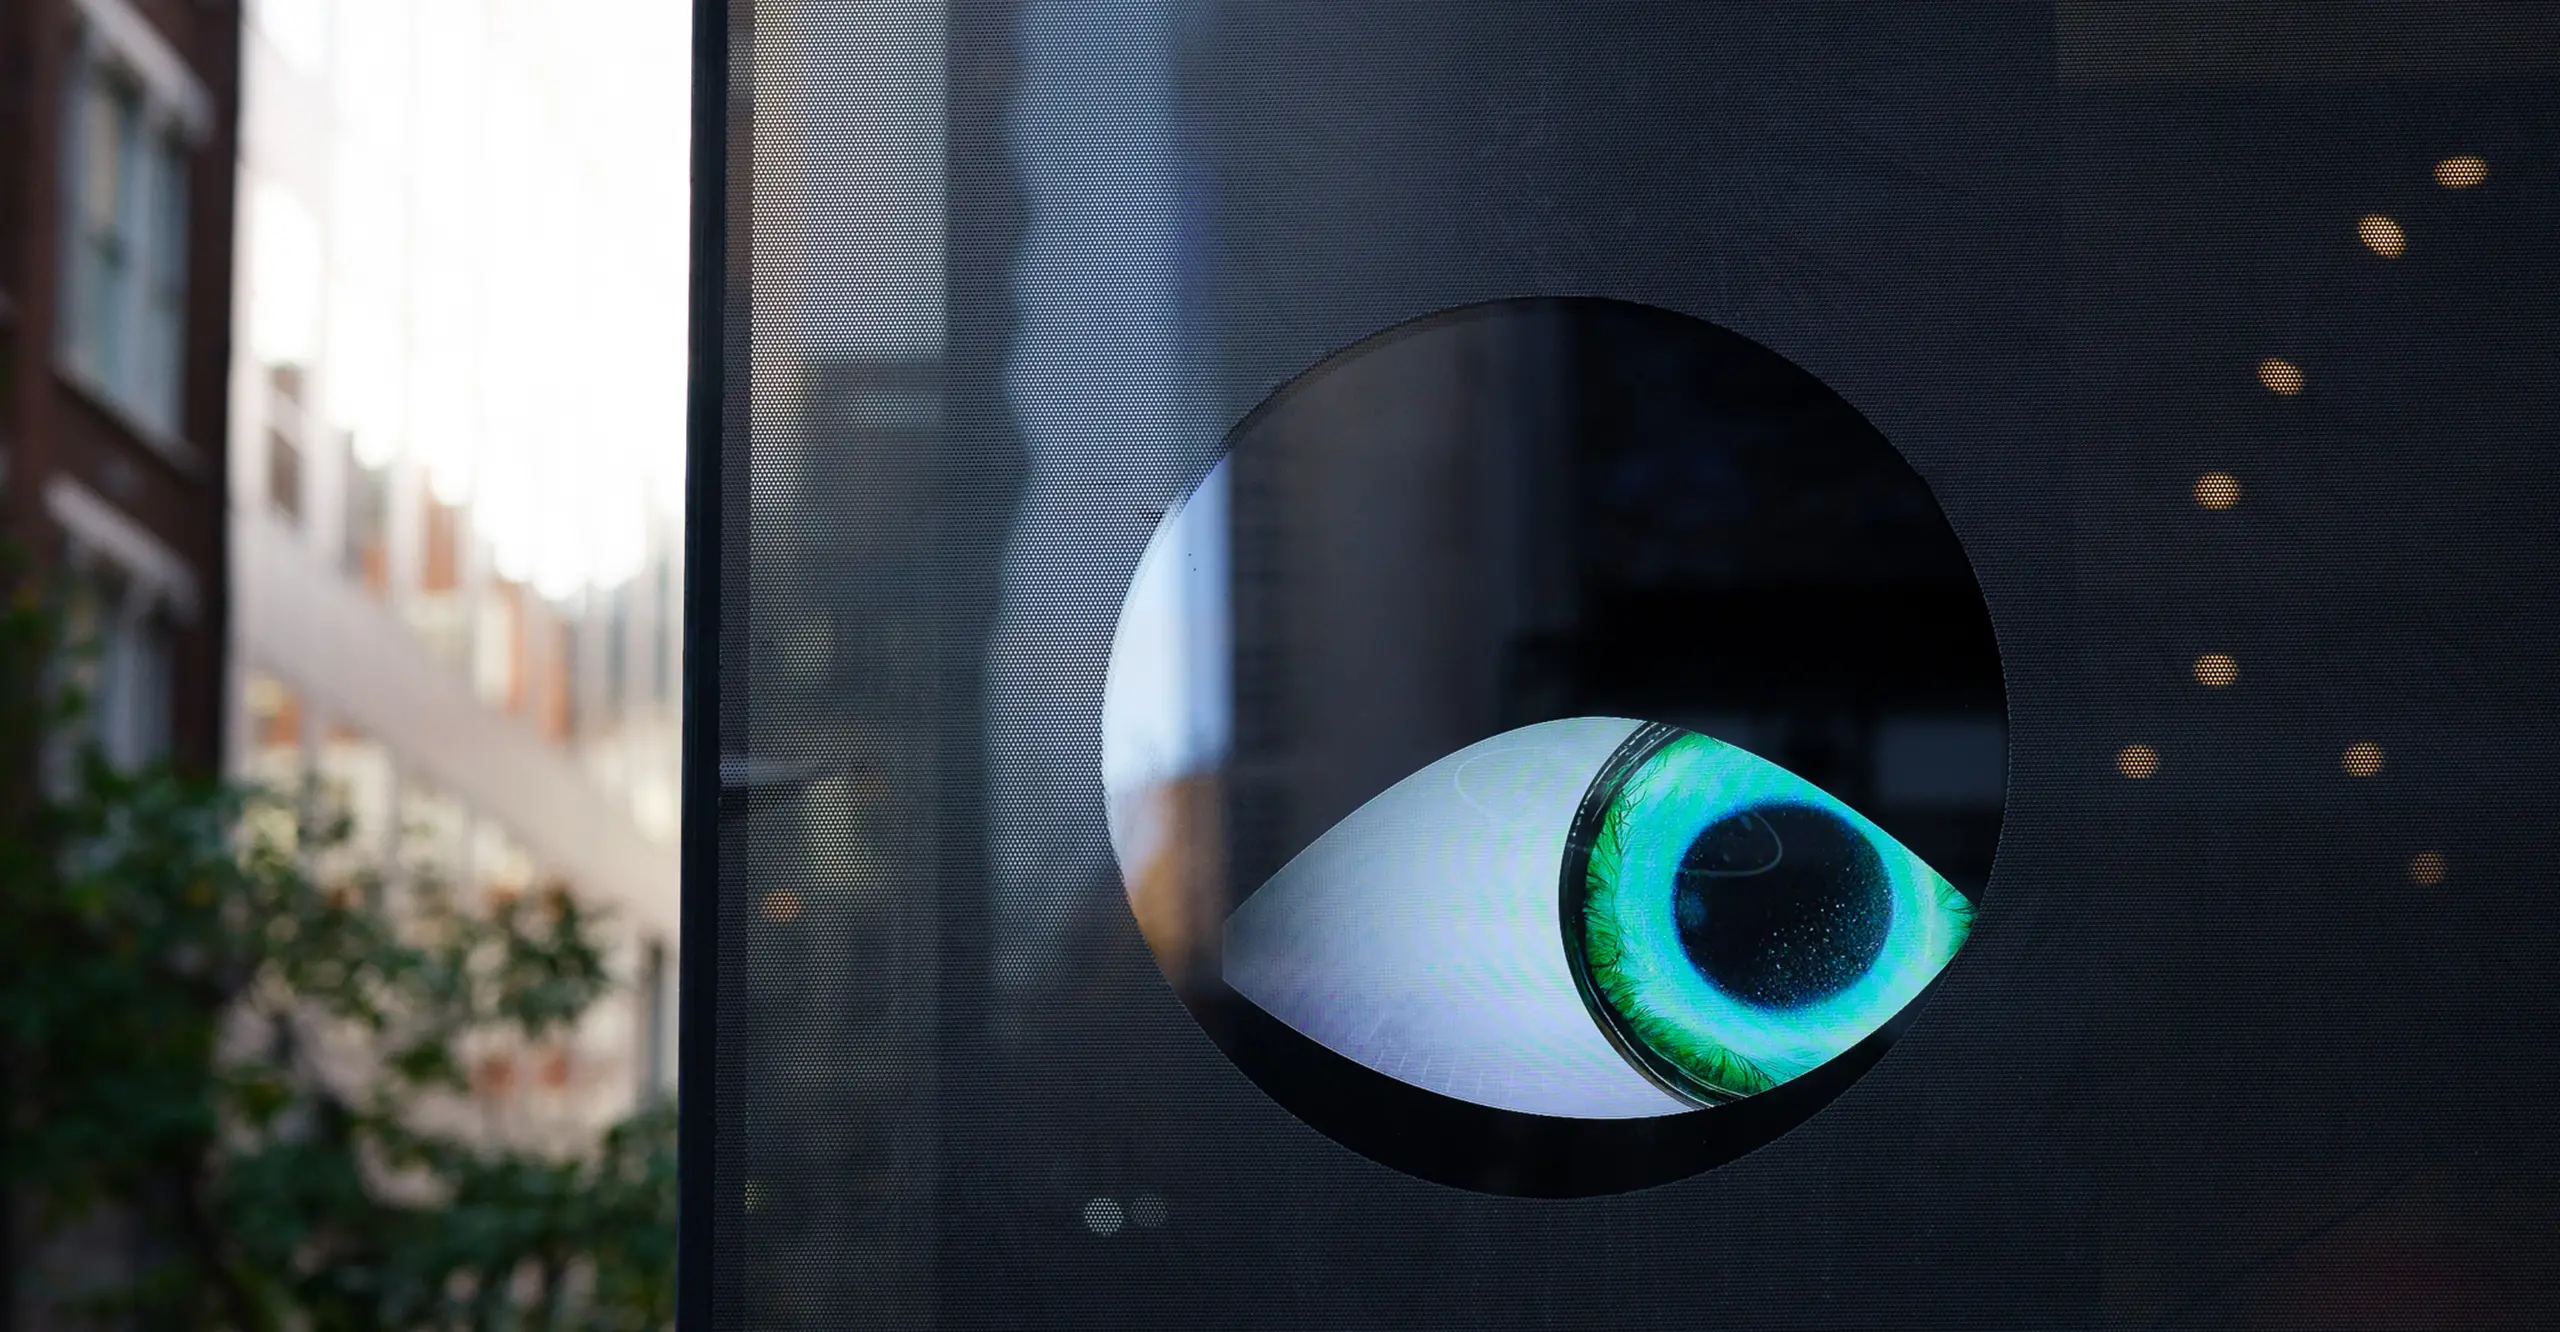 A large animated eye looks out of a dark window